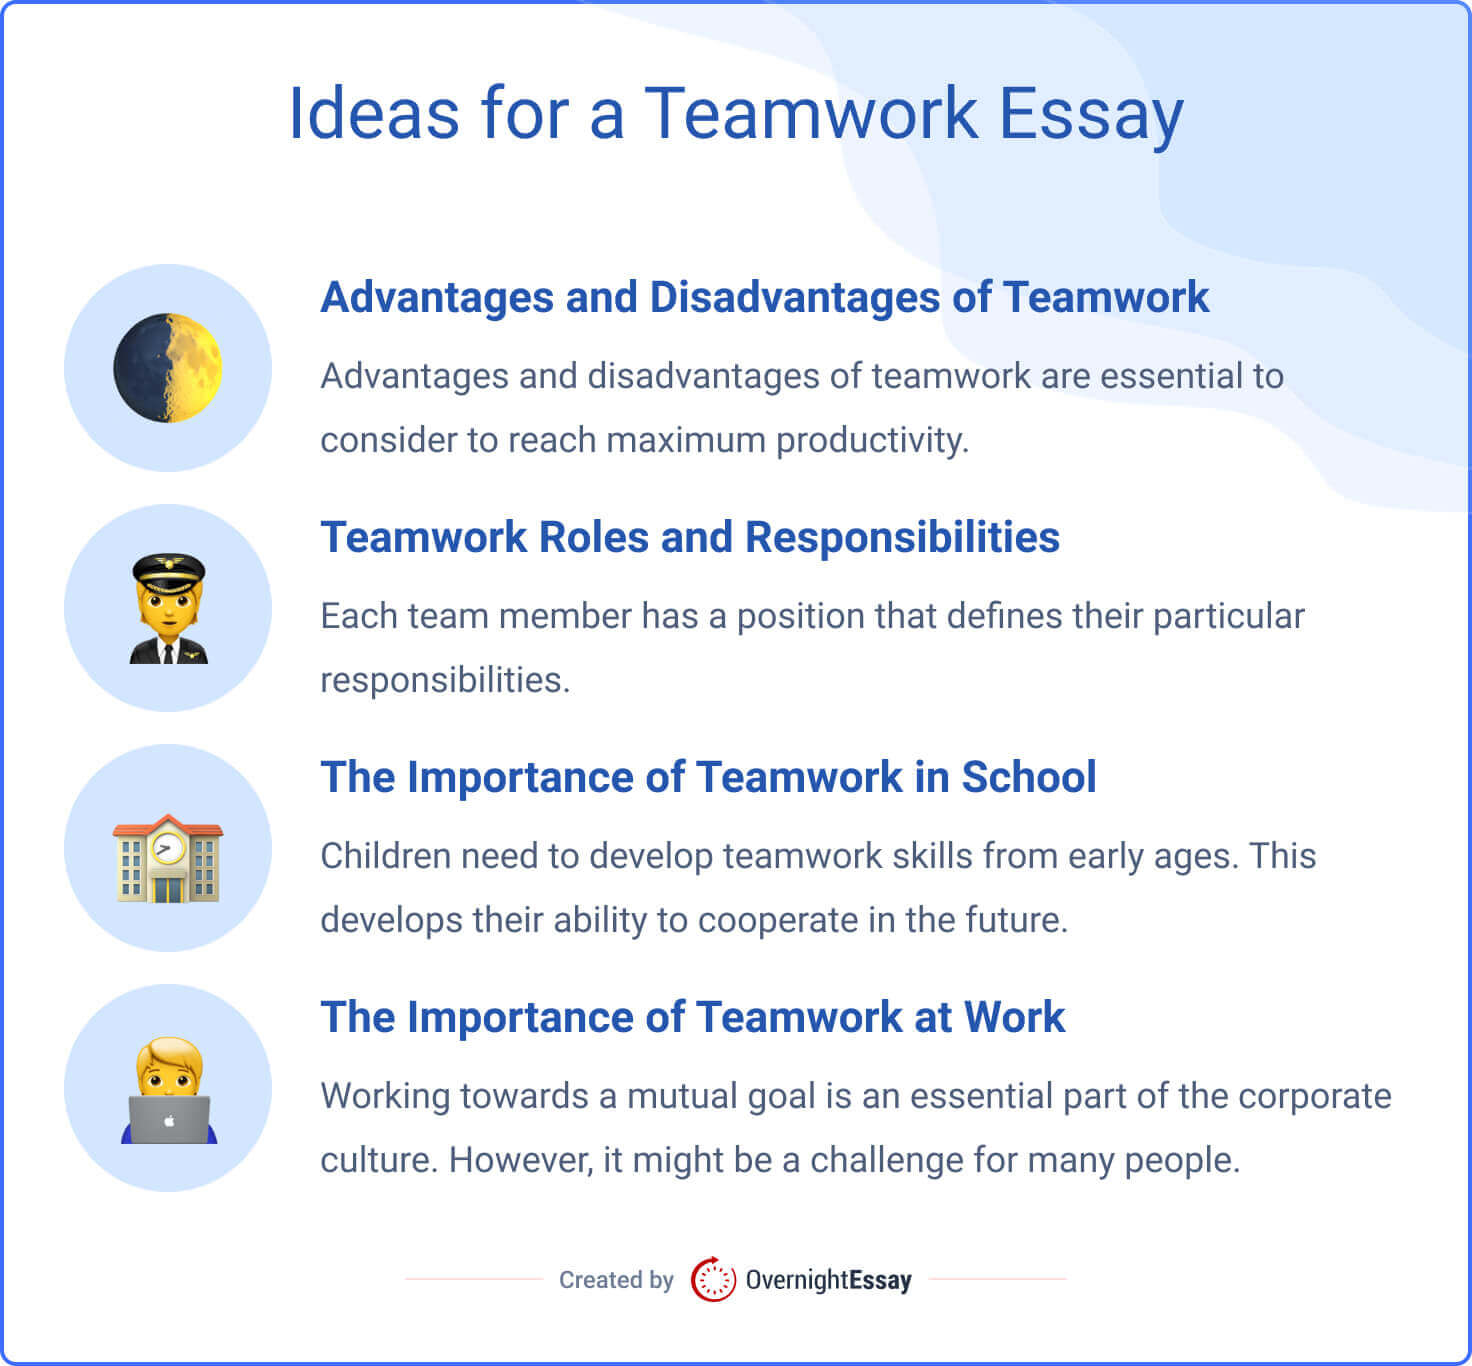 The picture introduces four interesting topics for an essay about teamwork.